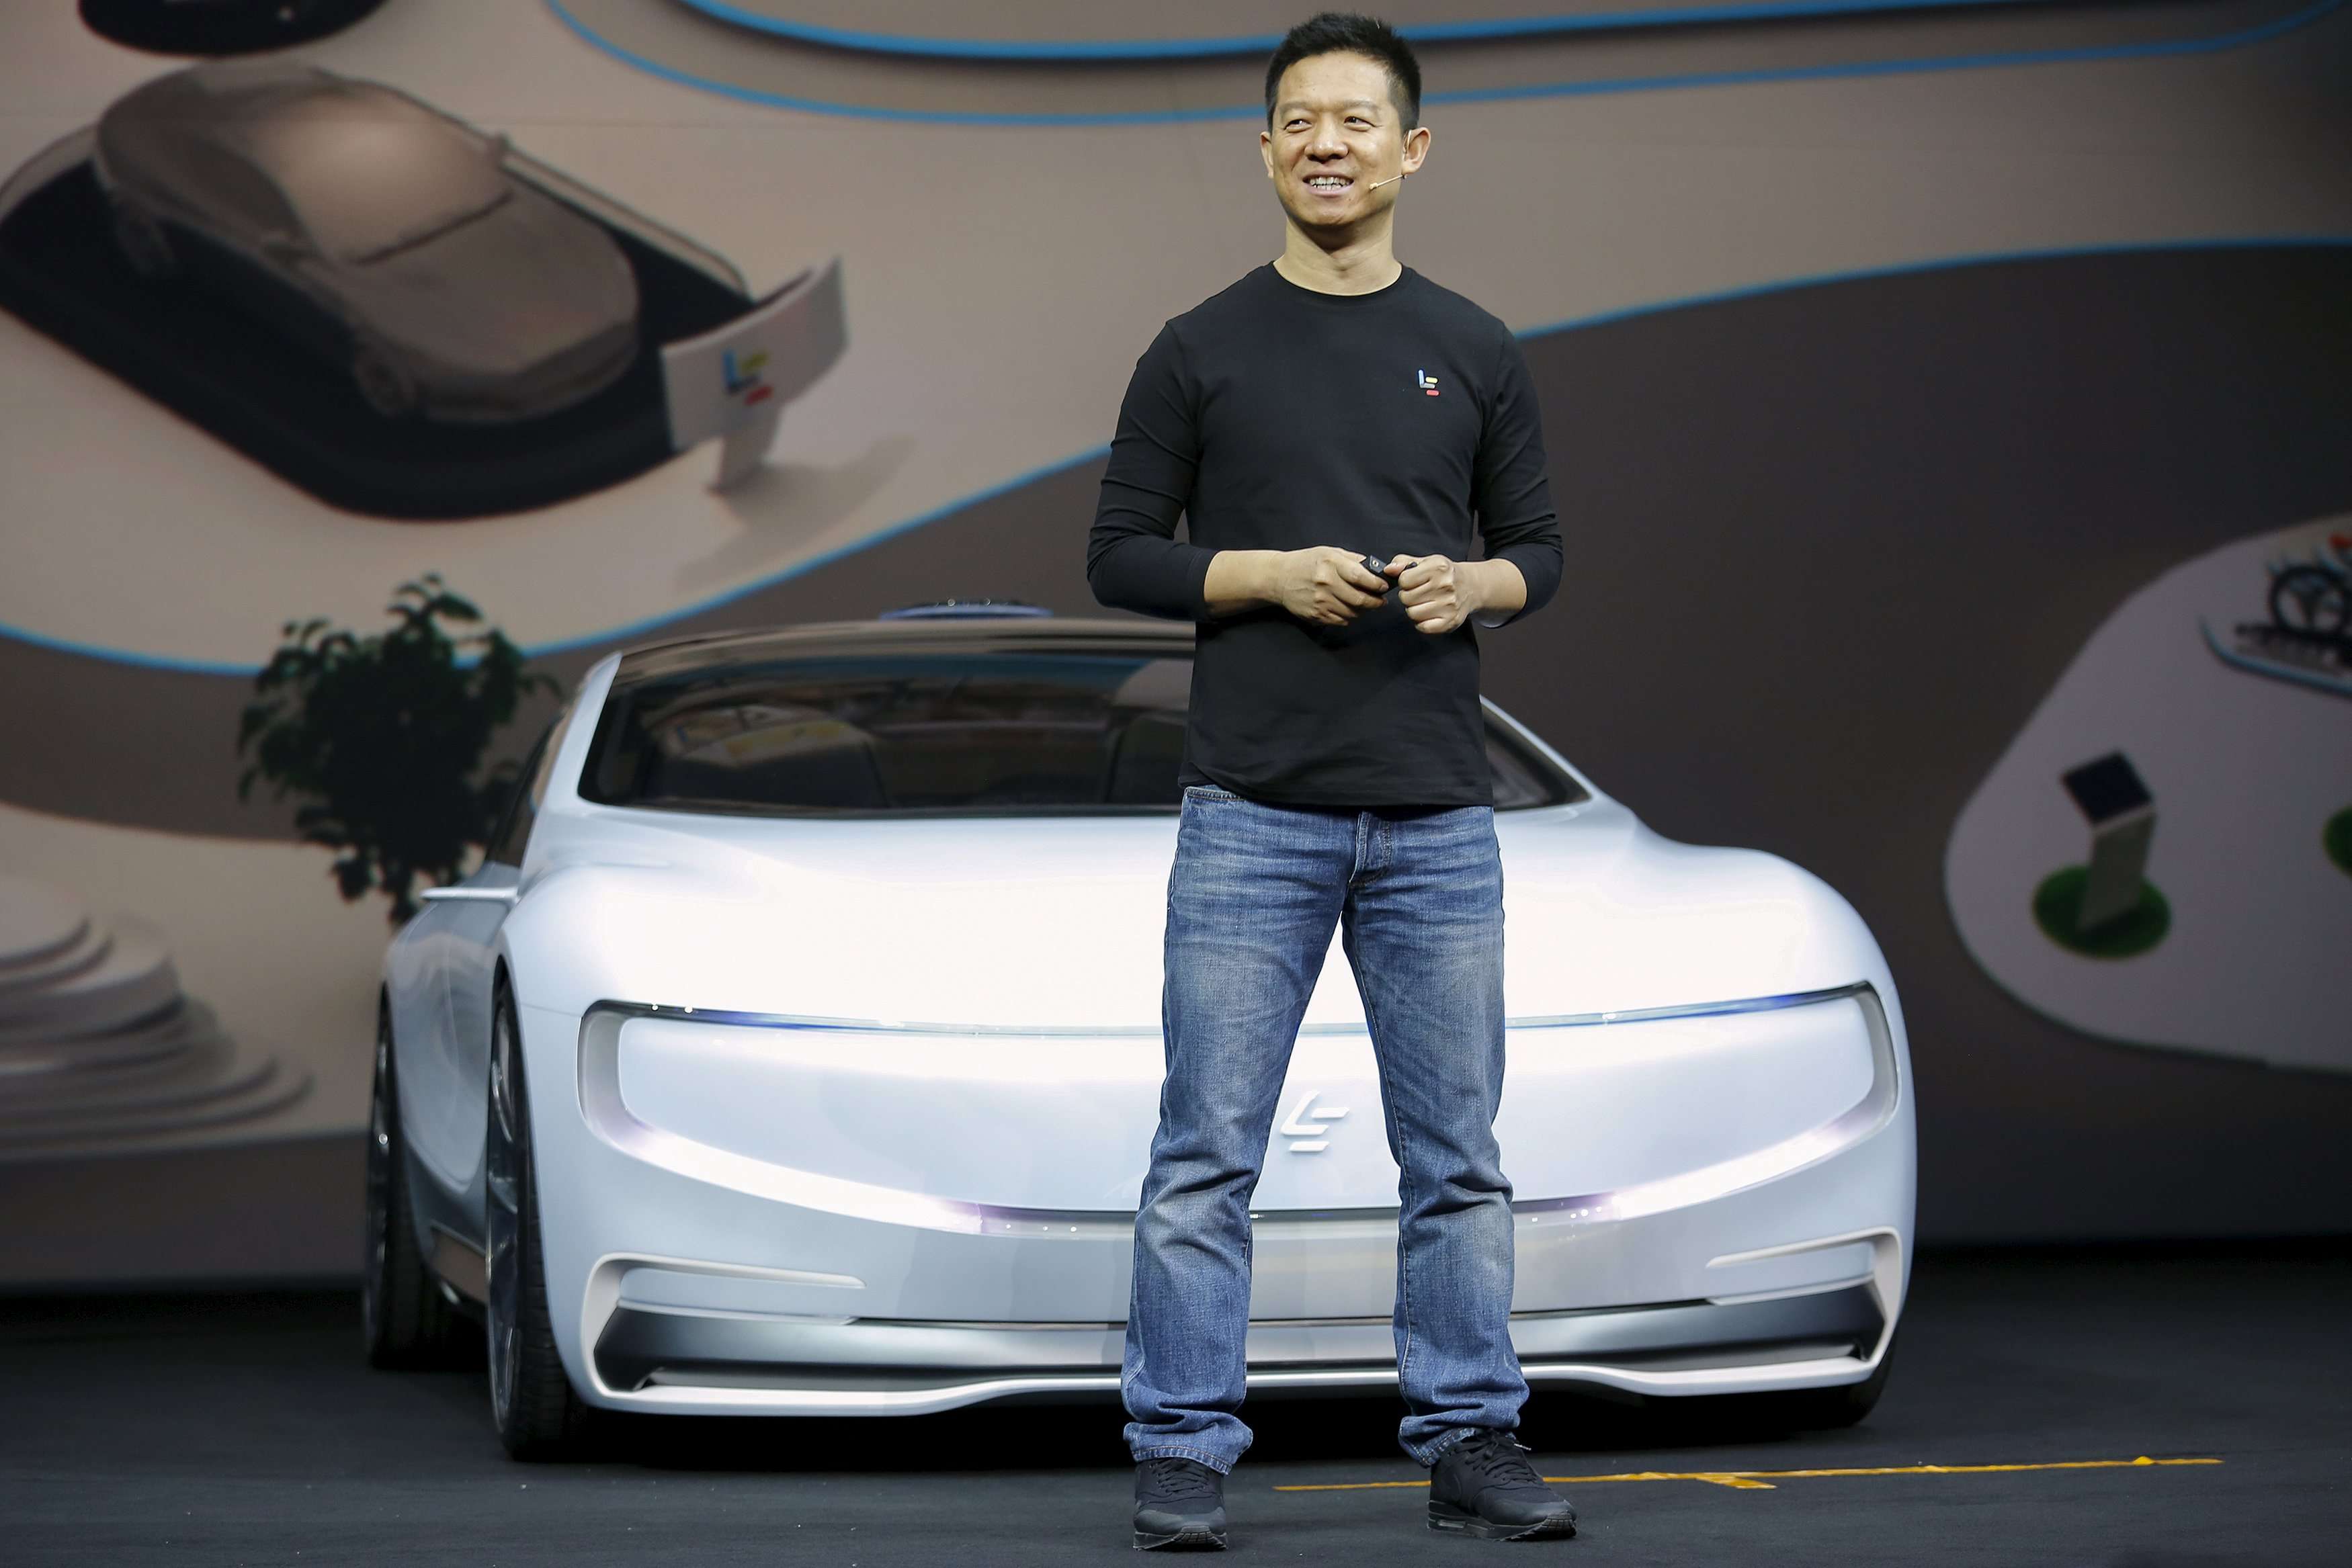 Jia Yueting, co-founder and head of Le Holdings, unveils an all-electric battery ’concept’ car called LeSEE in Beijing. Reuters